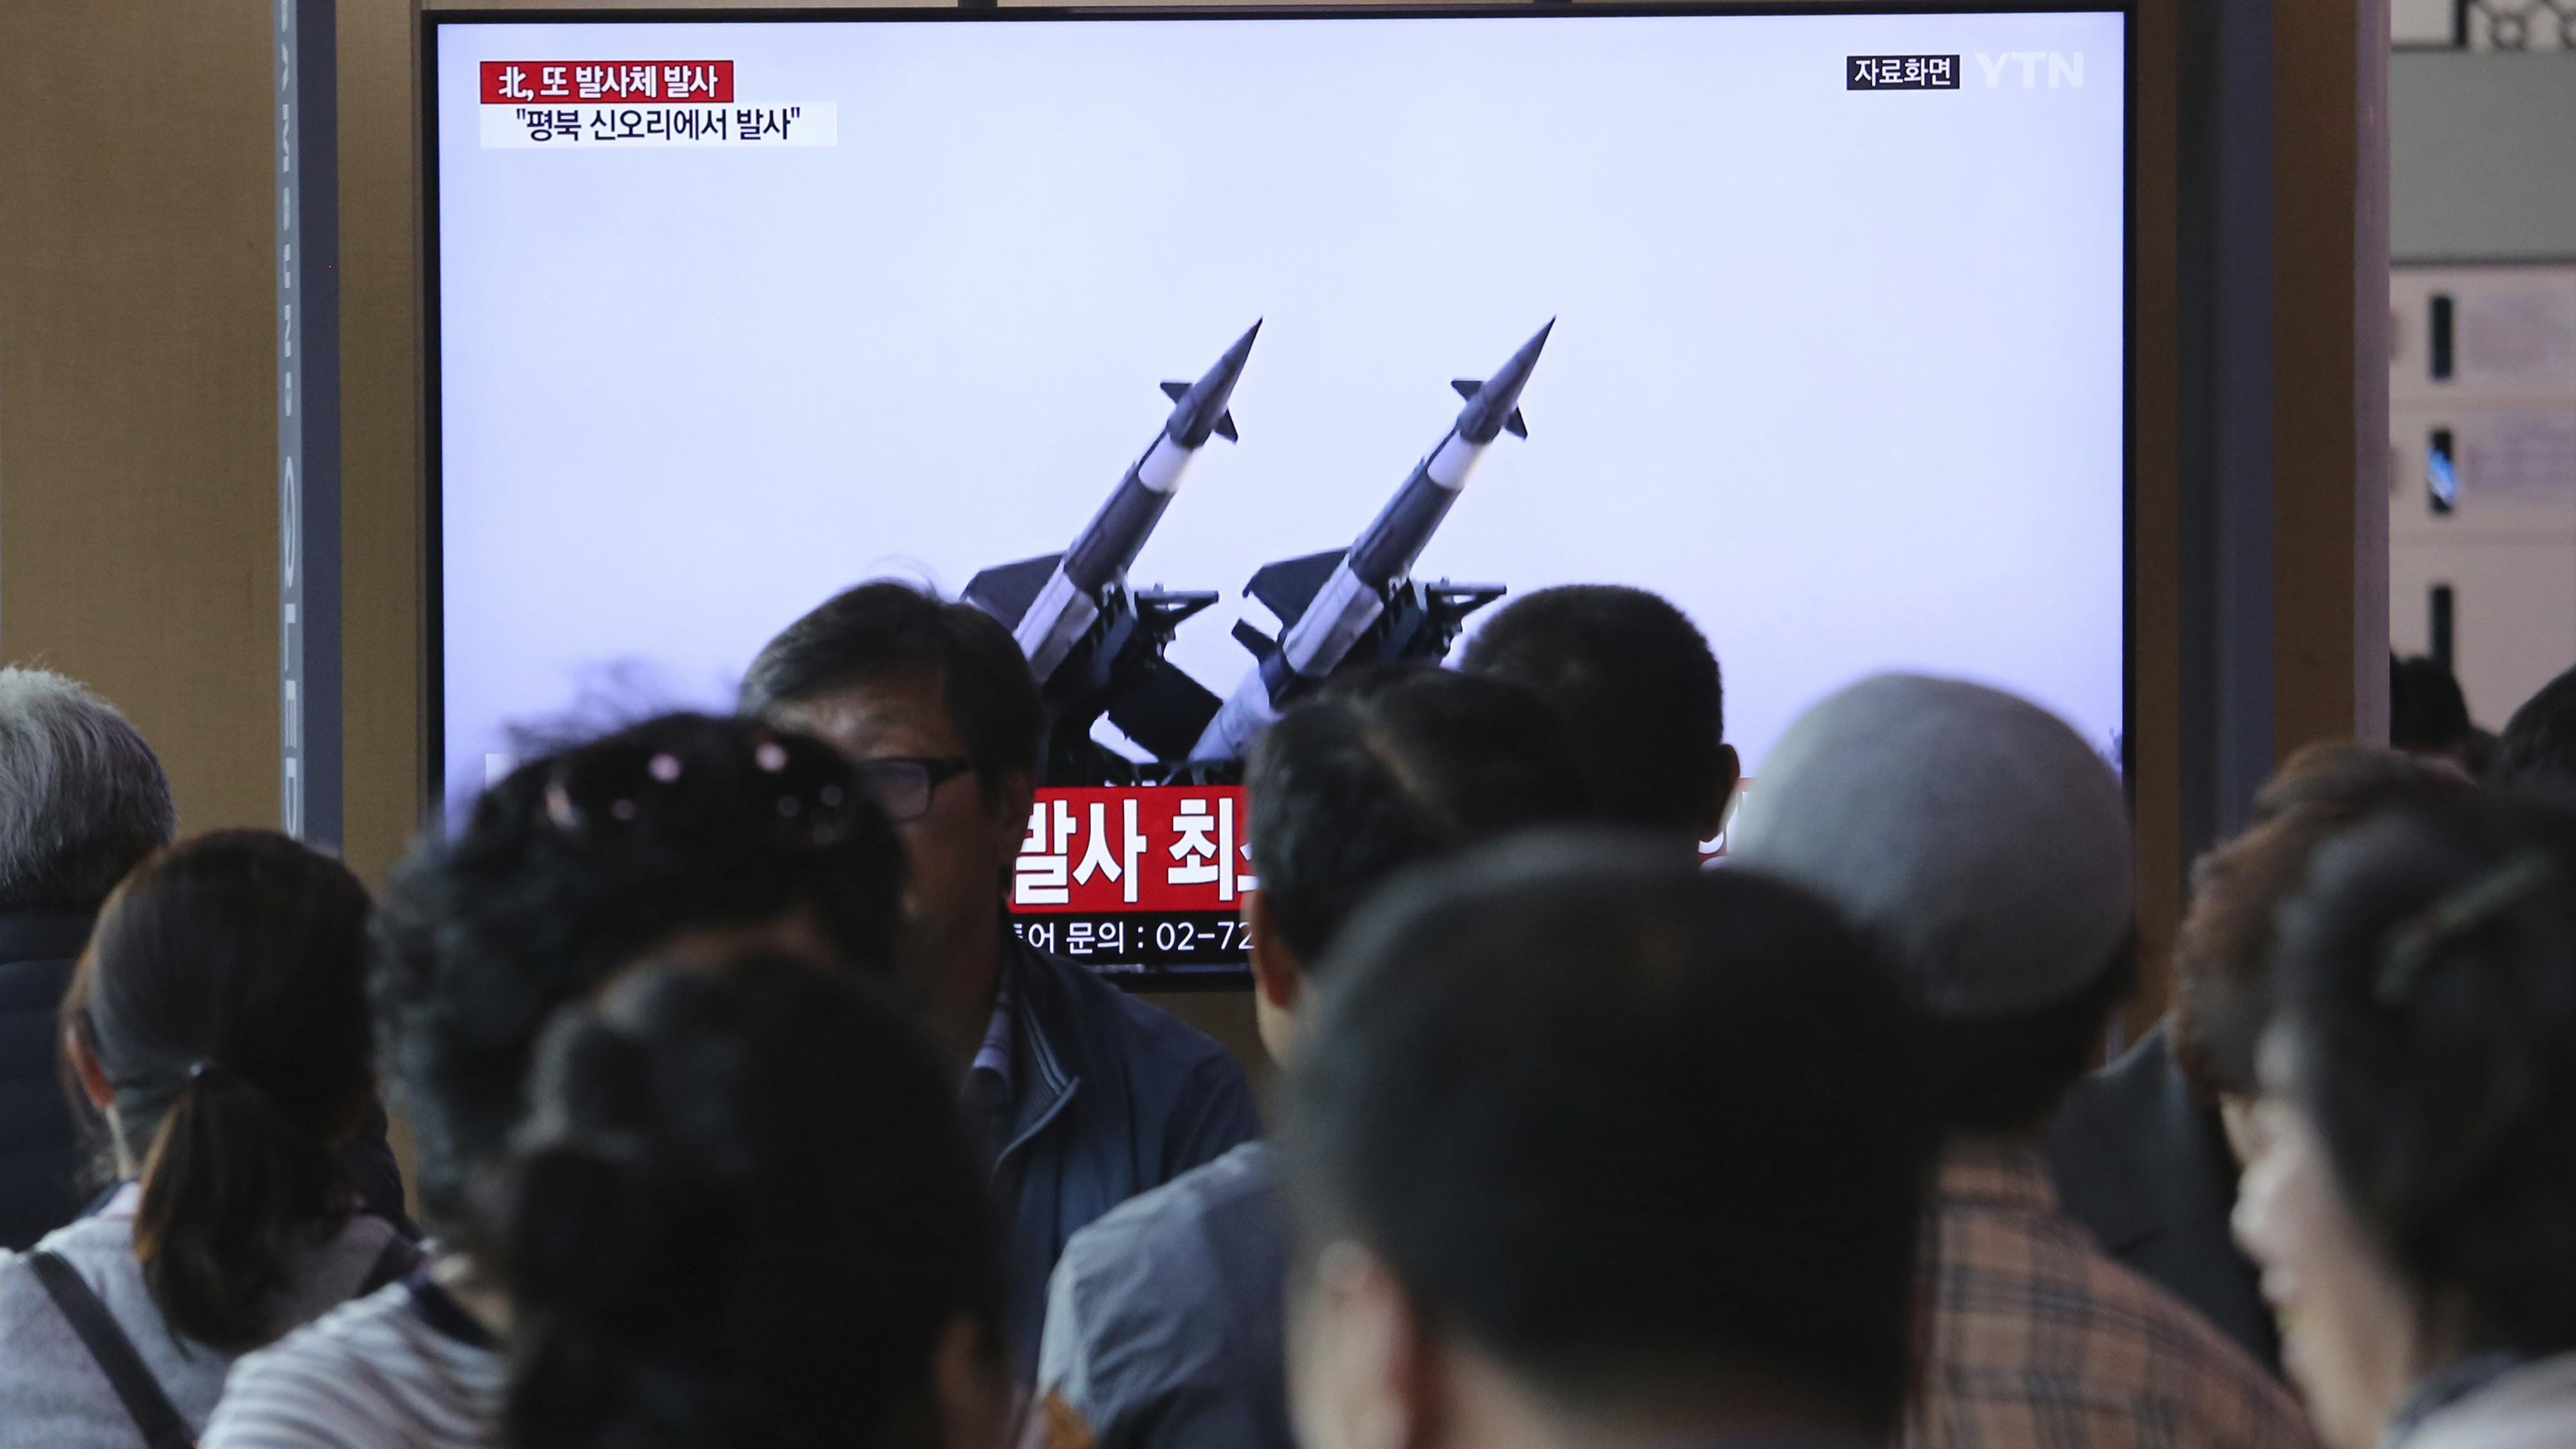 People watch TV showing file footage of North Korea's missiles during a news program at the Seoul Railway Station in Seoul, South Korea, Thursday, May 9, 2019. North Korea on Thursday fired projectiles from the country's western area.